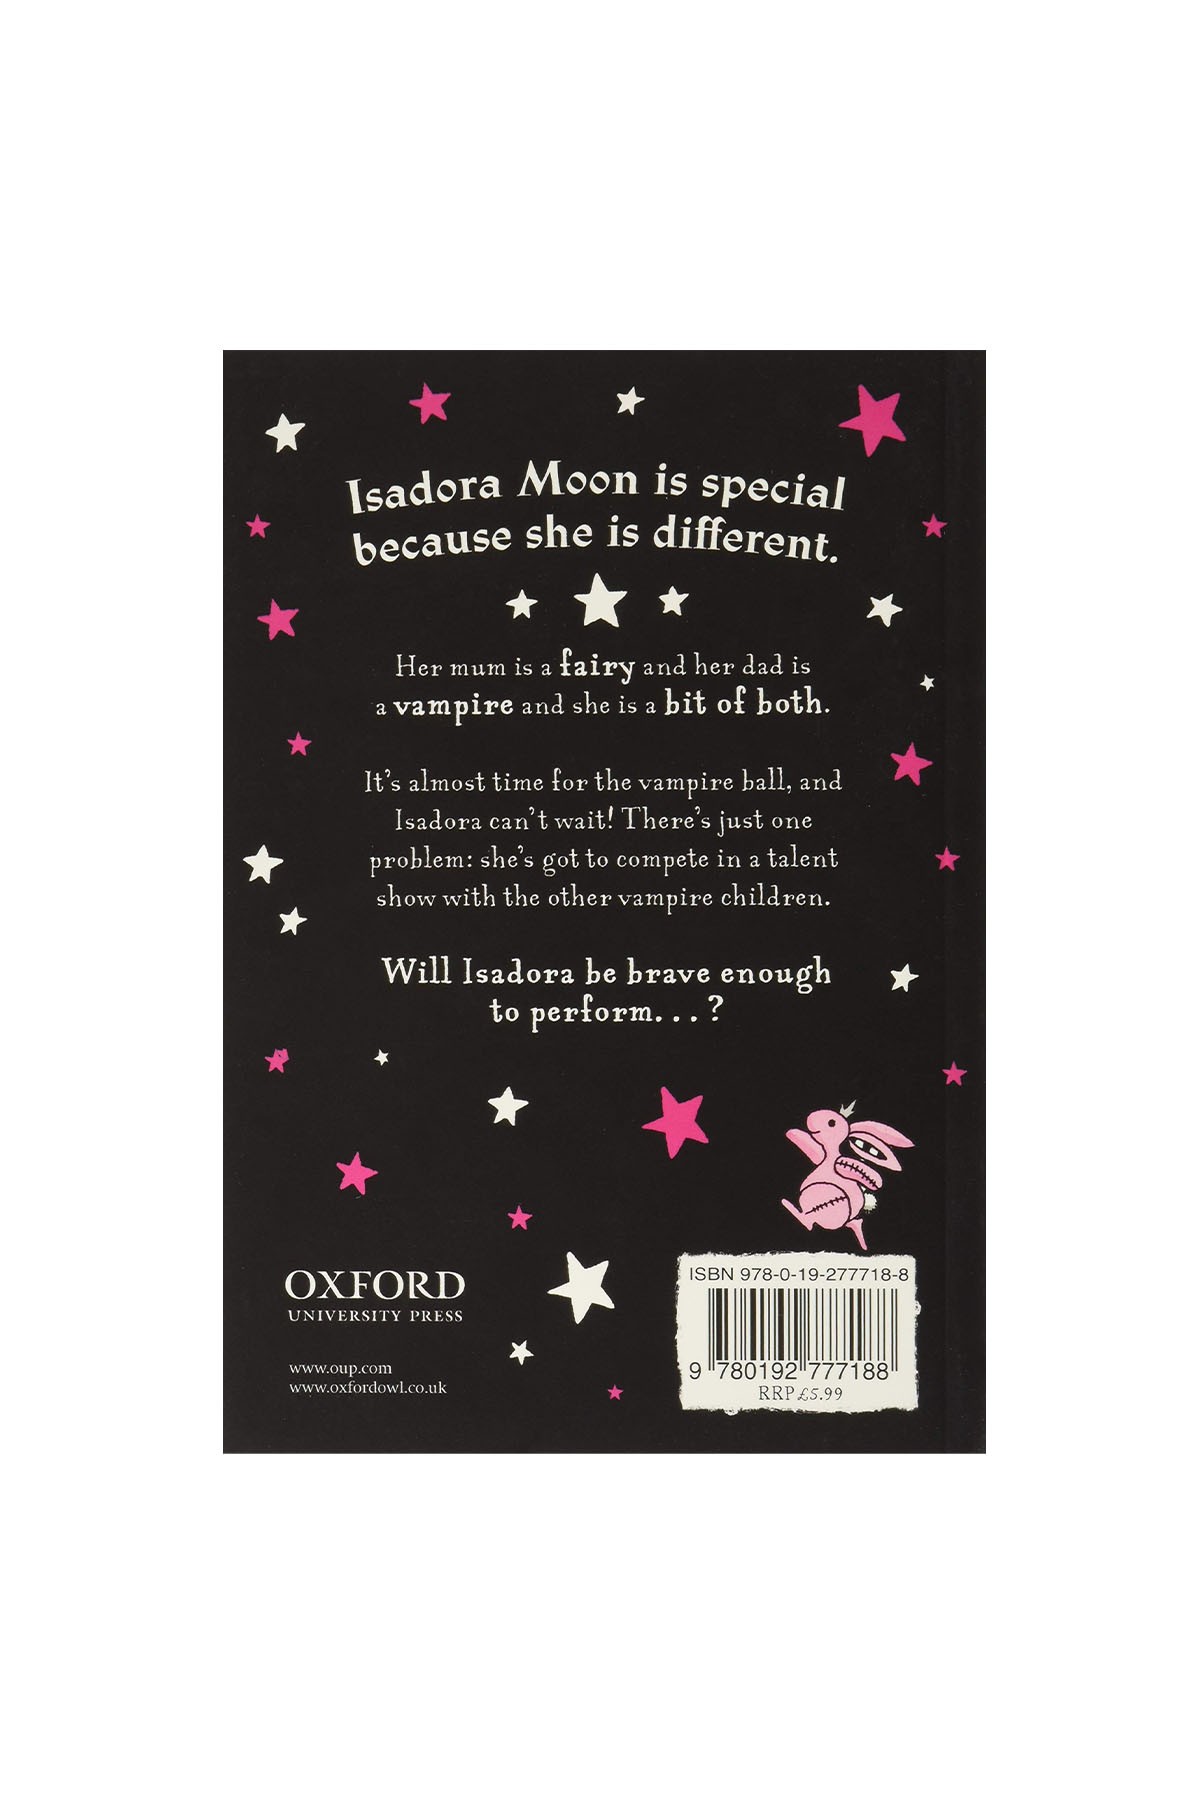 Oxford Childrens Book - Isadora Moon Puts On A Show